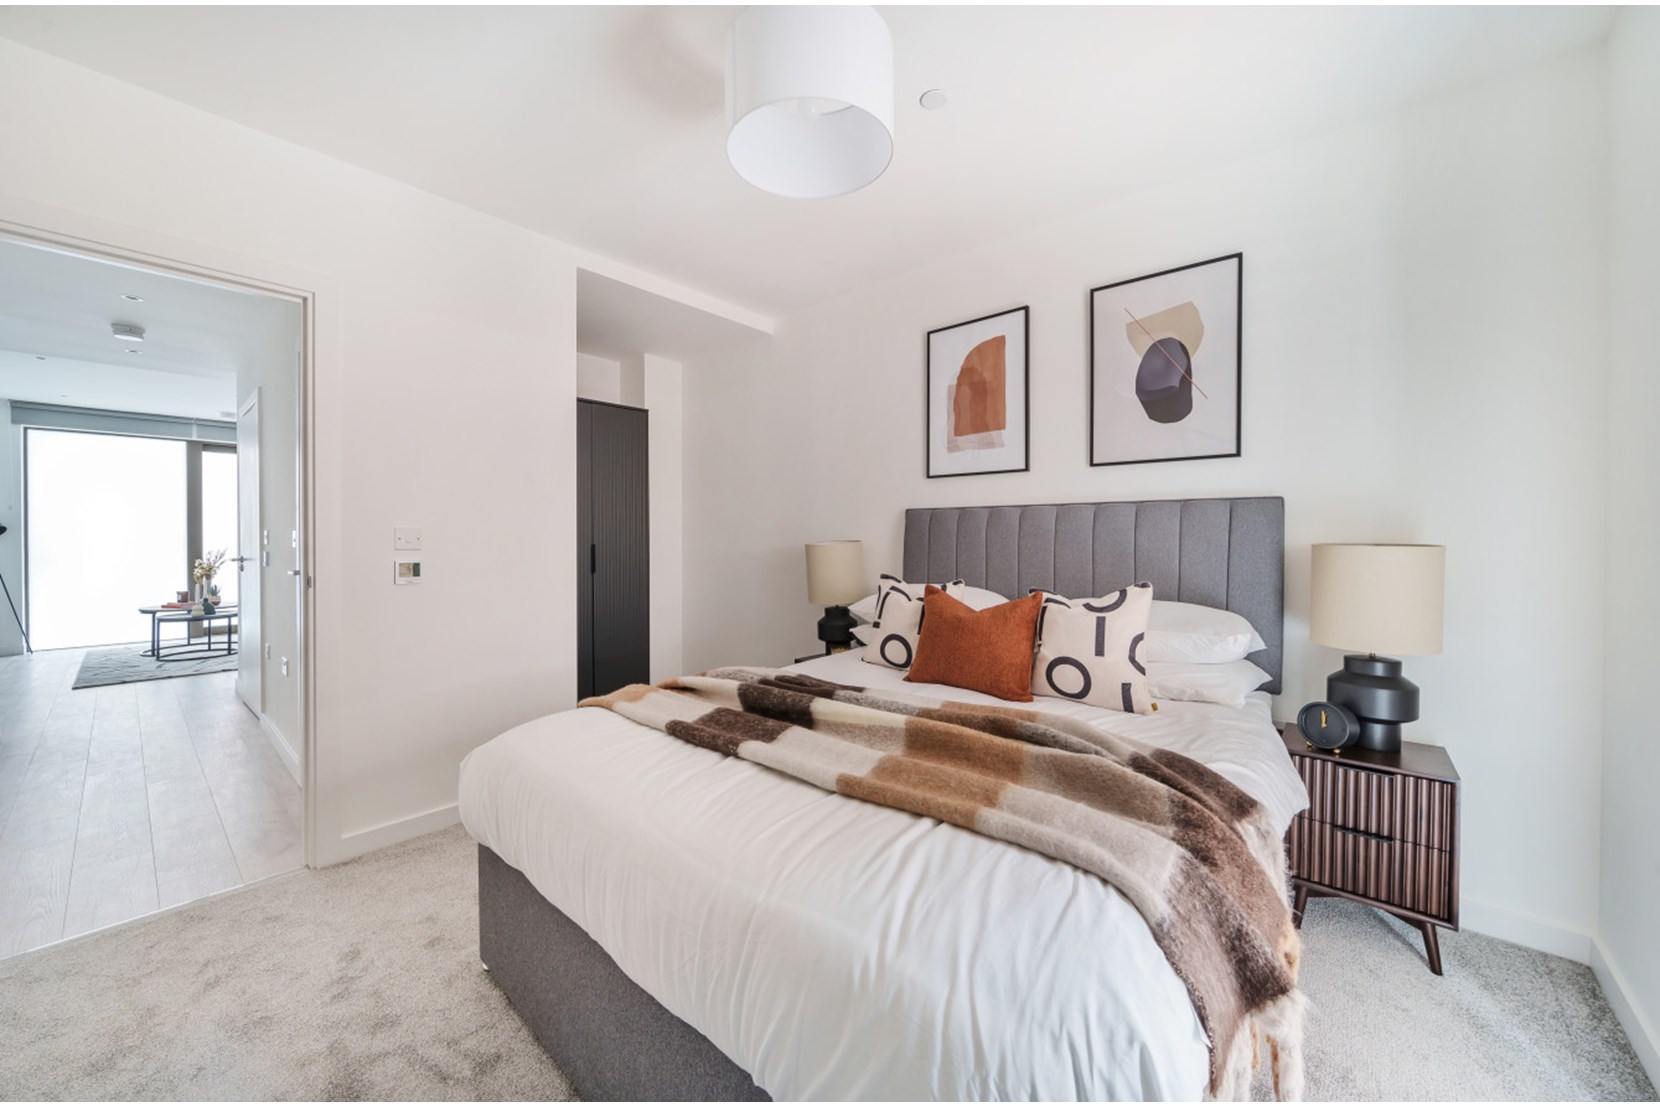 Apartments to Rent by Simple Life London in Anchor's Point, Royal Albert Dock, Newham, E16, bedroom